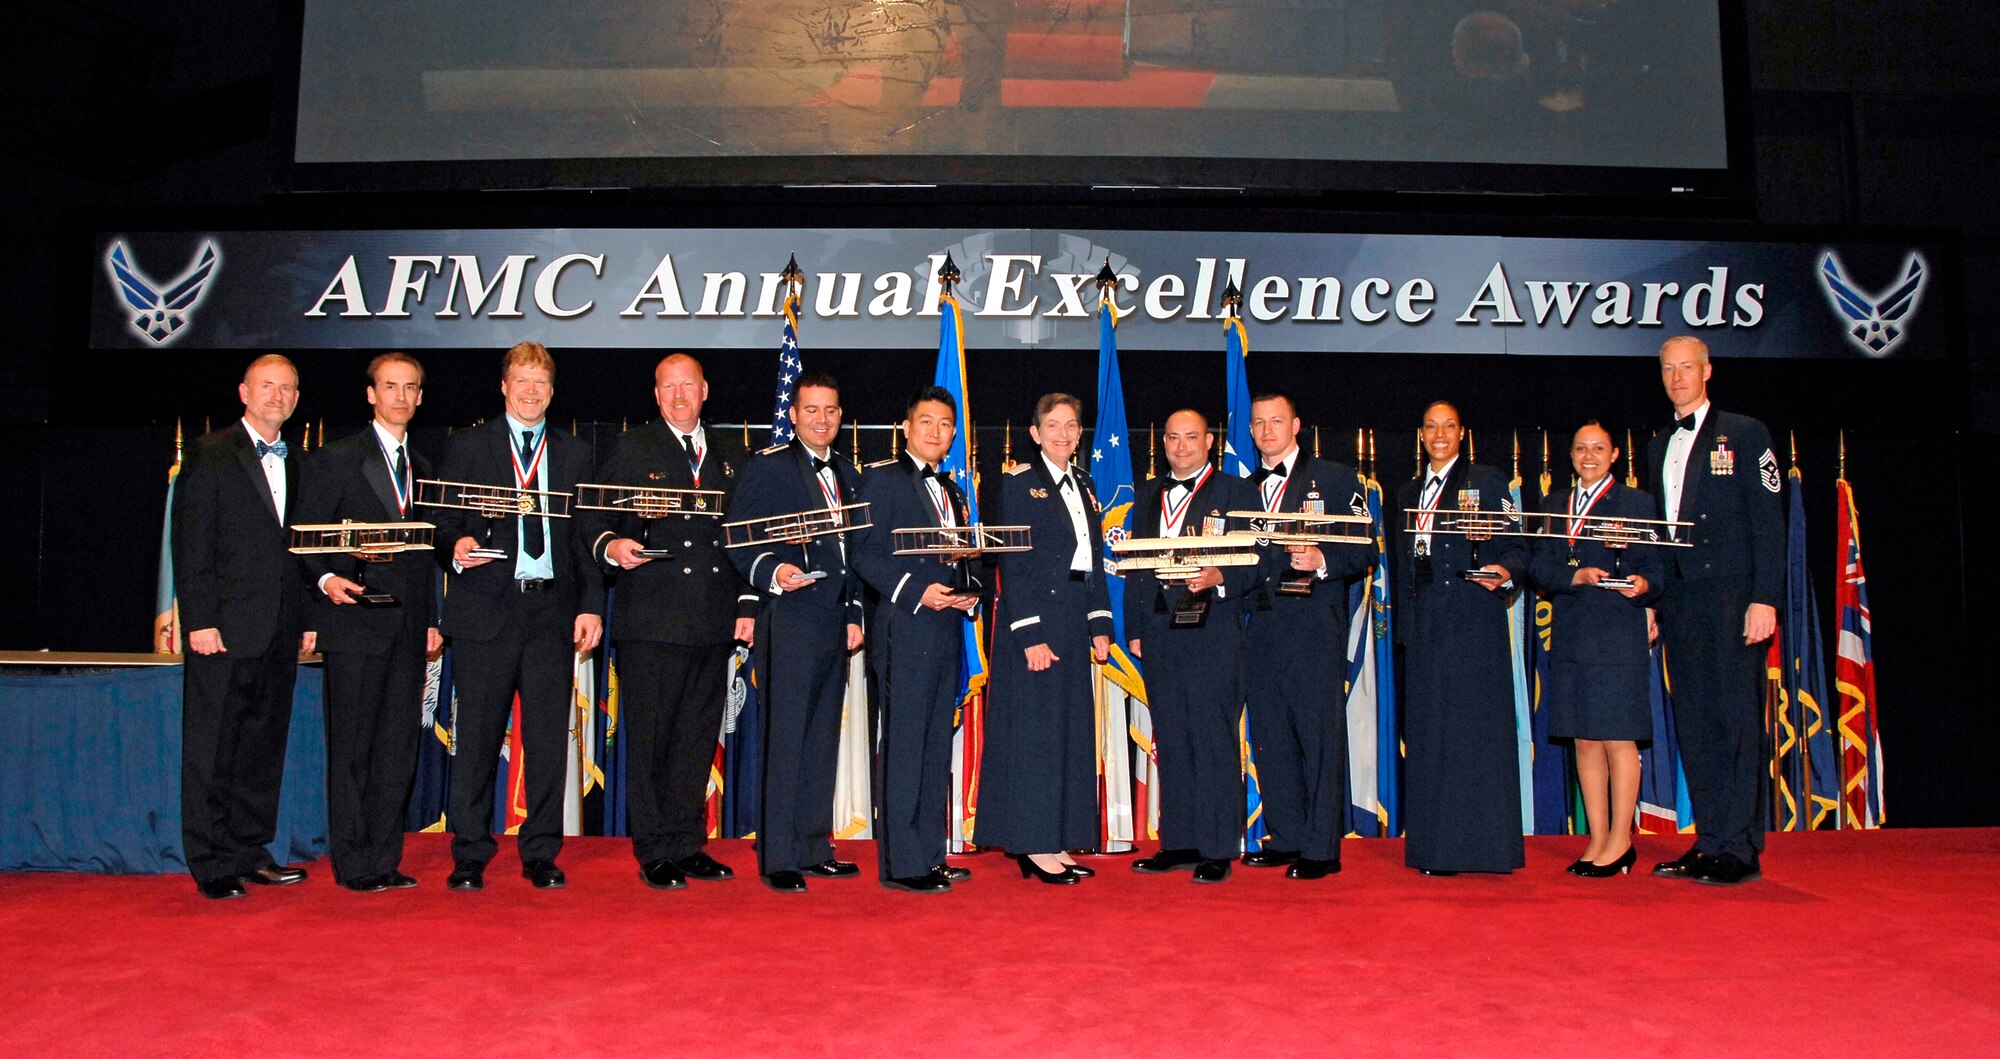 Air Force Materiel Command's 2015 Annual Excellence Award winners gather with AFMC leadership after the awards ceremony March 9, 2016. From left are Michael Gill, AFMC Executive Director; Andrew Mendoza; Eric Brickson; Steven Smith; Maj. David Jarnot; Capt. Jae Jeon; Gen. Ellen Pawlikowski, AFMC Commander; Master Sgt. Brian Partido; Master Sgt. Randy McKenzie; Technical Sgt. Kasmir Alford; Senior Airman Raquel Caramanno; and Chief Master Sgt. Michael Warner, AFMC Command Chief. (U.S. Air Force photo/Albert Bright)